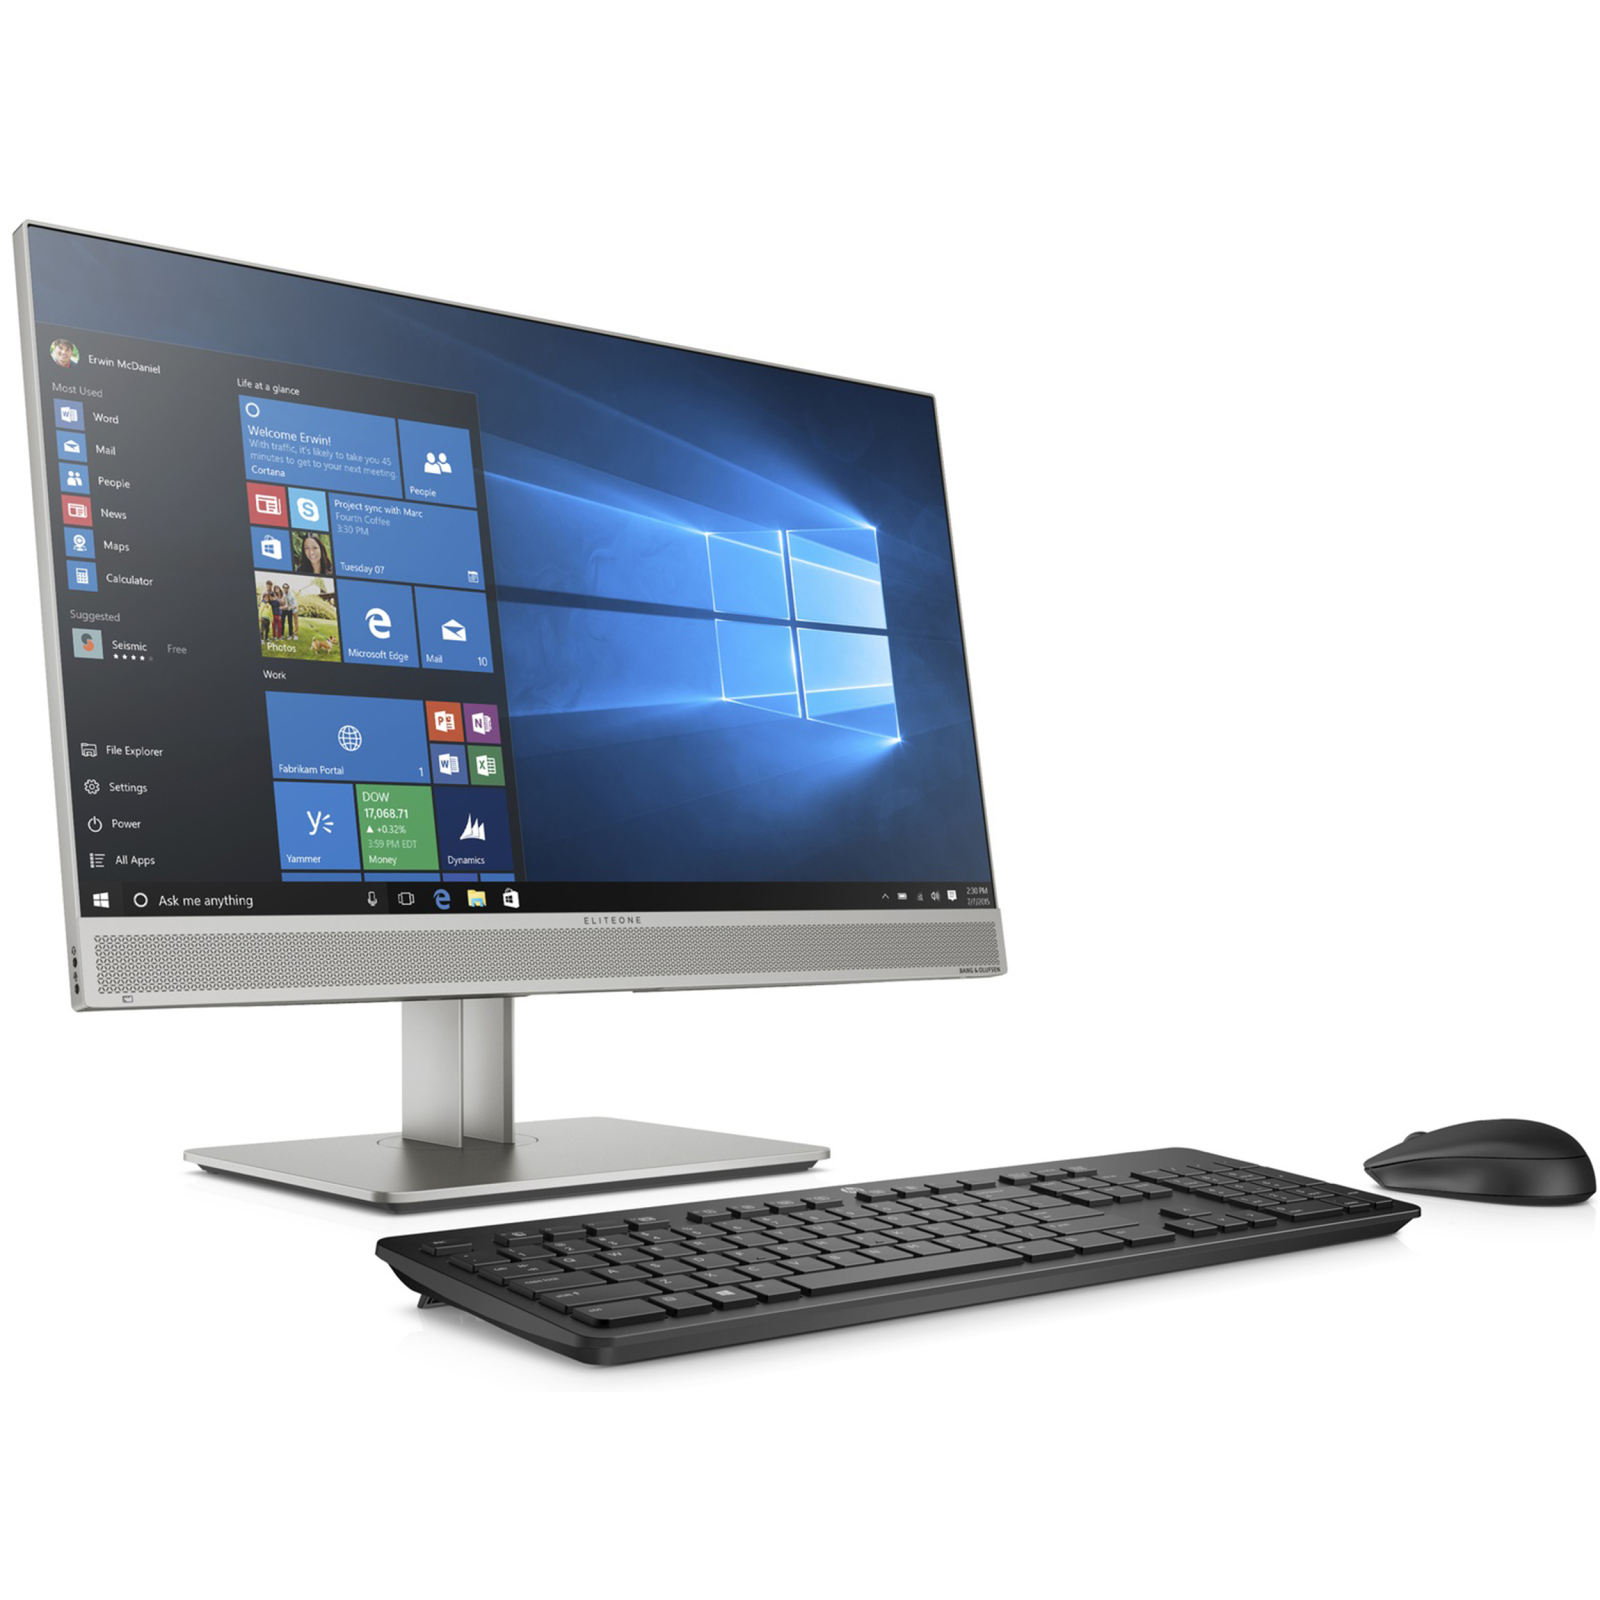  HP G4-R1 All in One